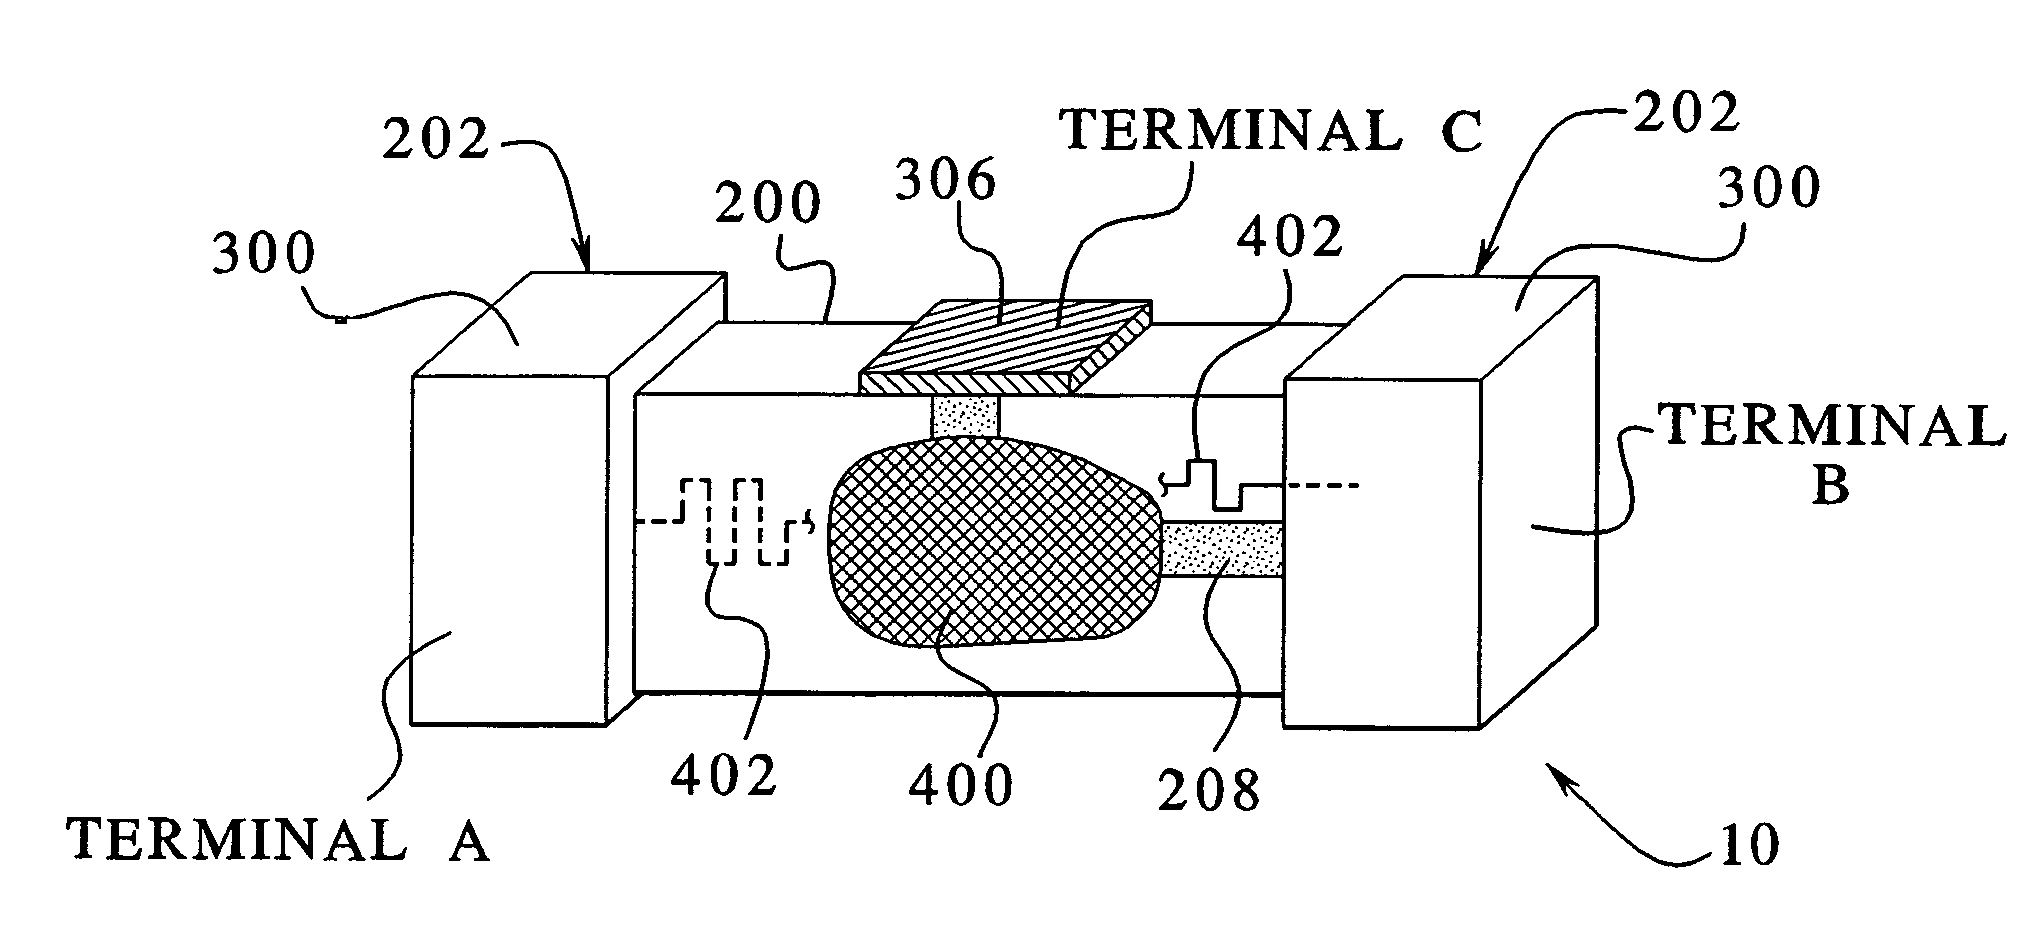 Integrated overcurrent and overvoltage apparatus for use in the protection of telecommunication circuits